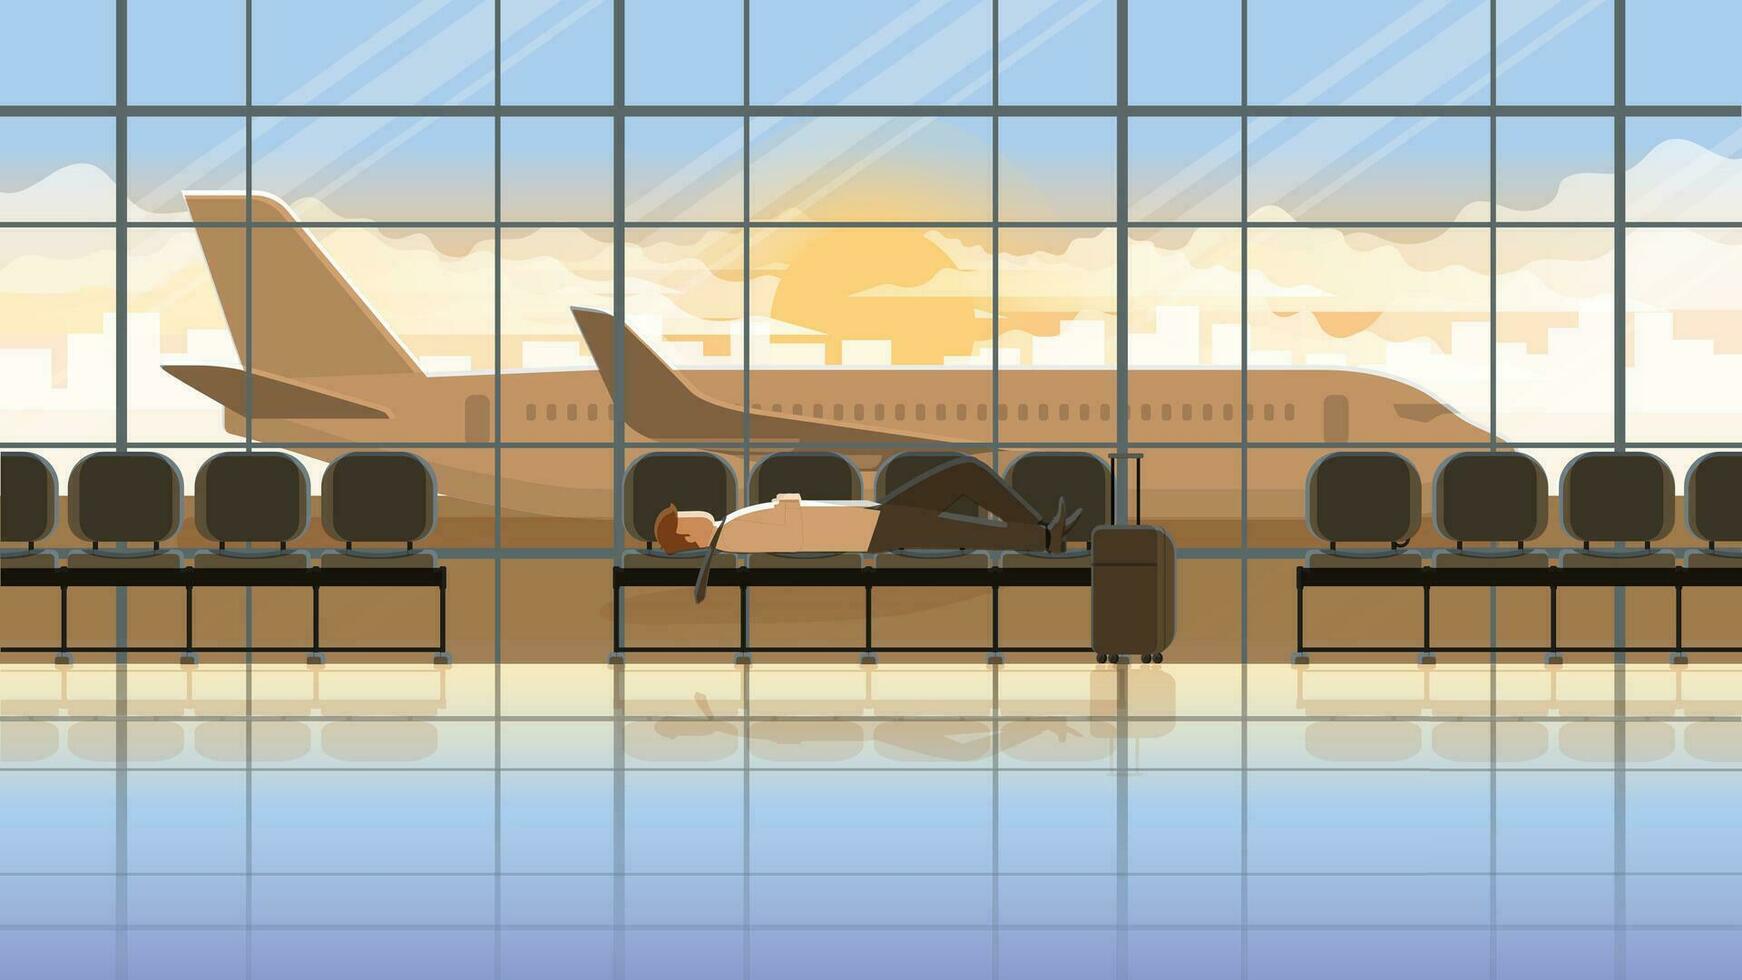 Overwork tired office man lay down sleep on the seat in the international airport terminal vector